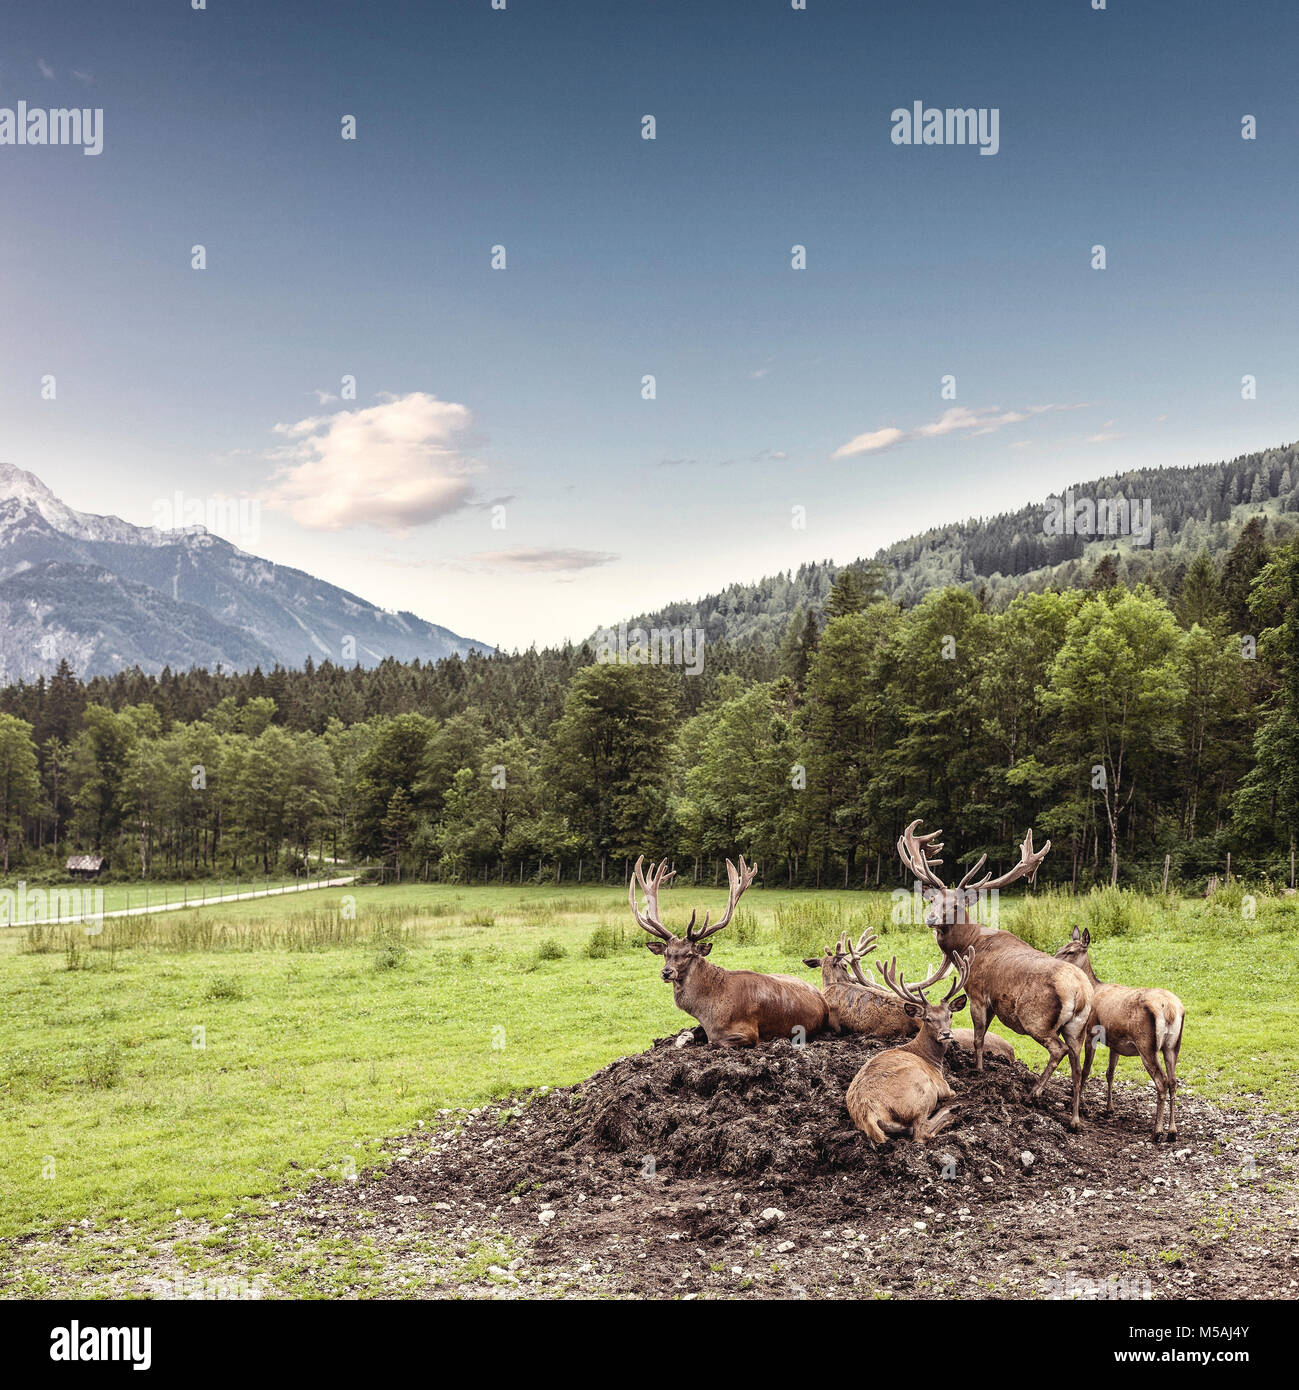 Magnificent herd of red deer with branched antlers grazes in grass at beautiful nature in the mountains Stock Photo